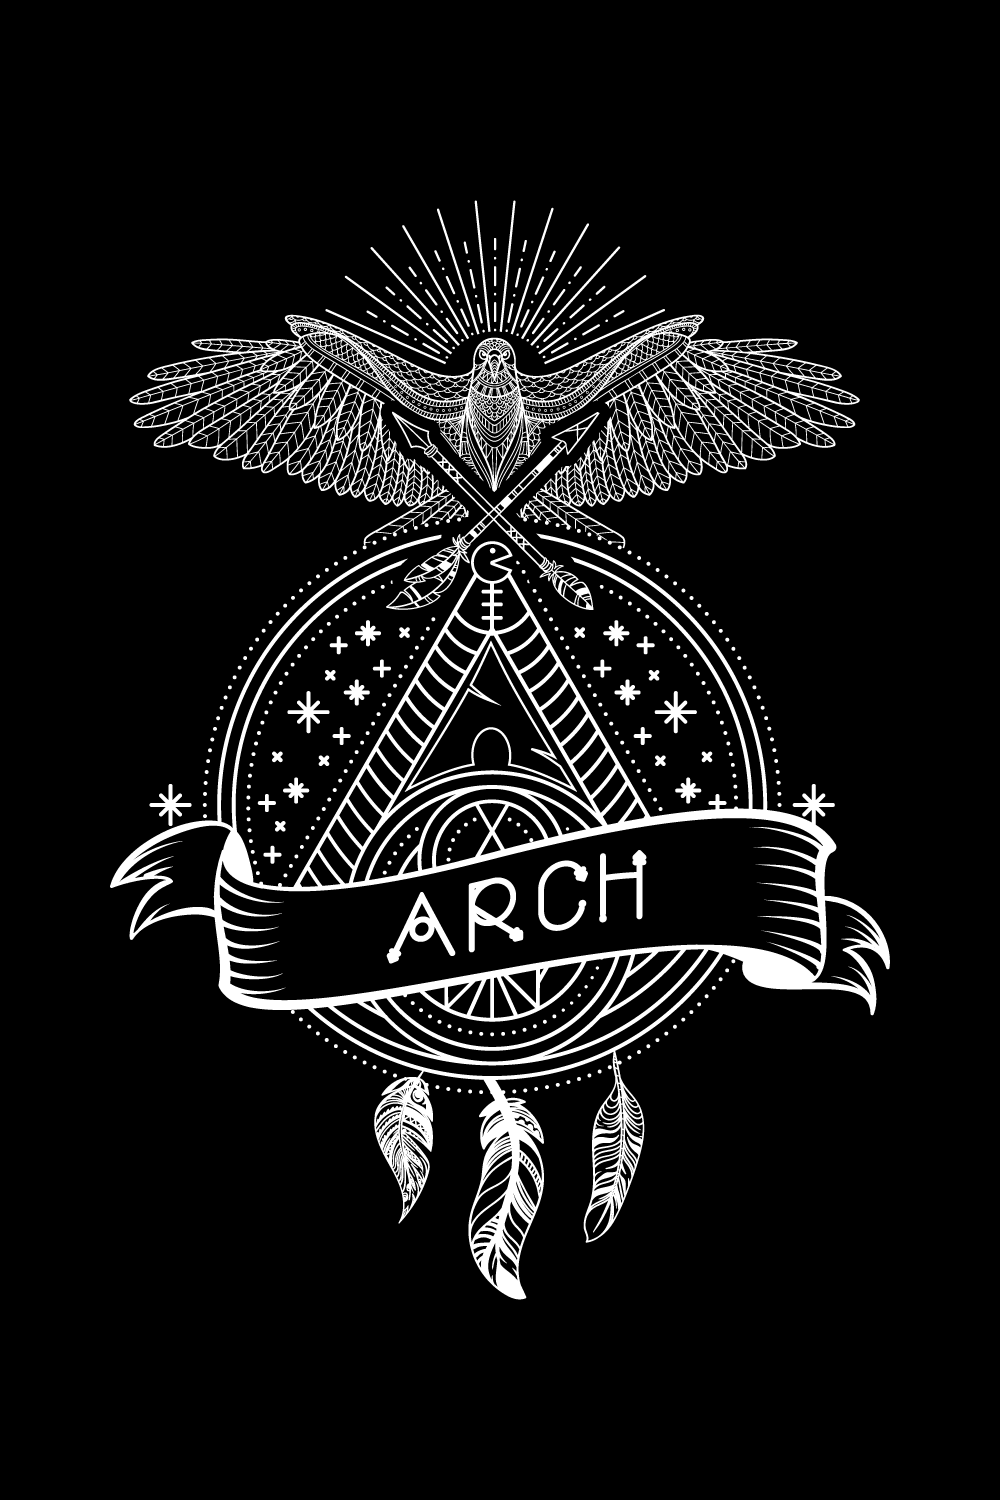 Black Arch Logo - dark arch linux image in playing cards style